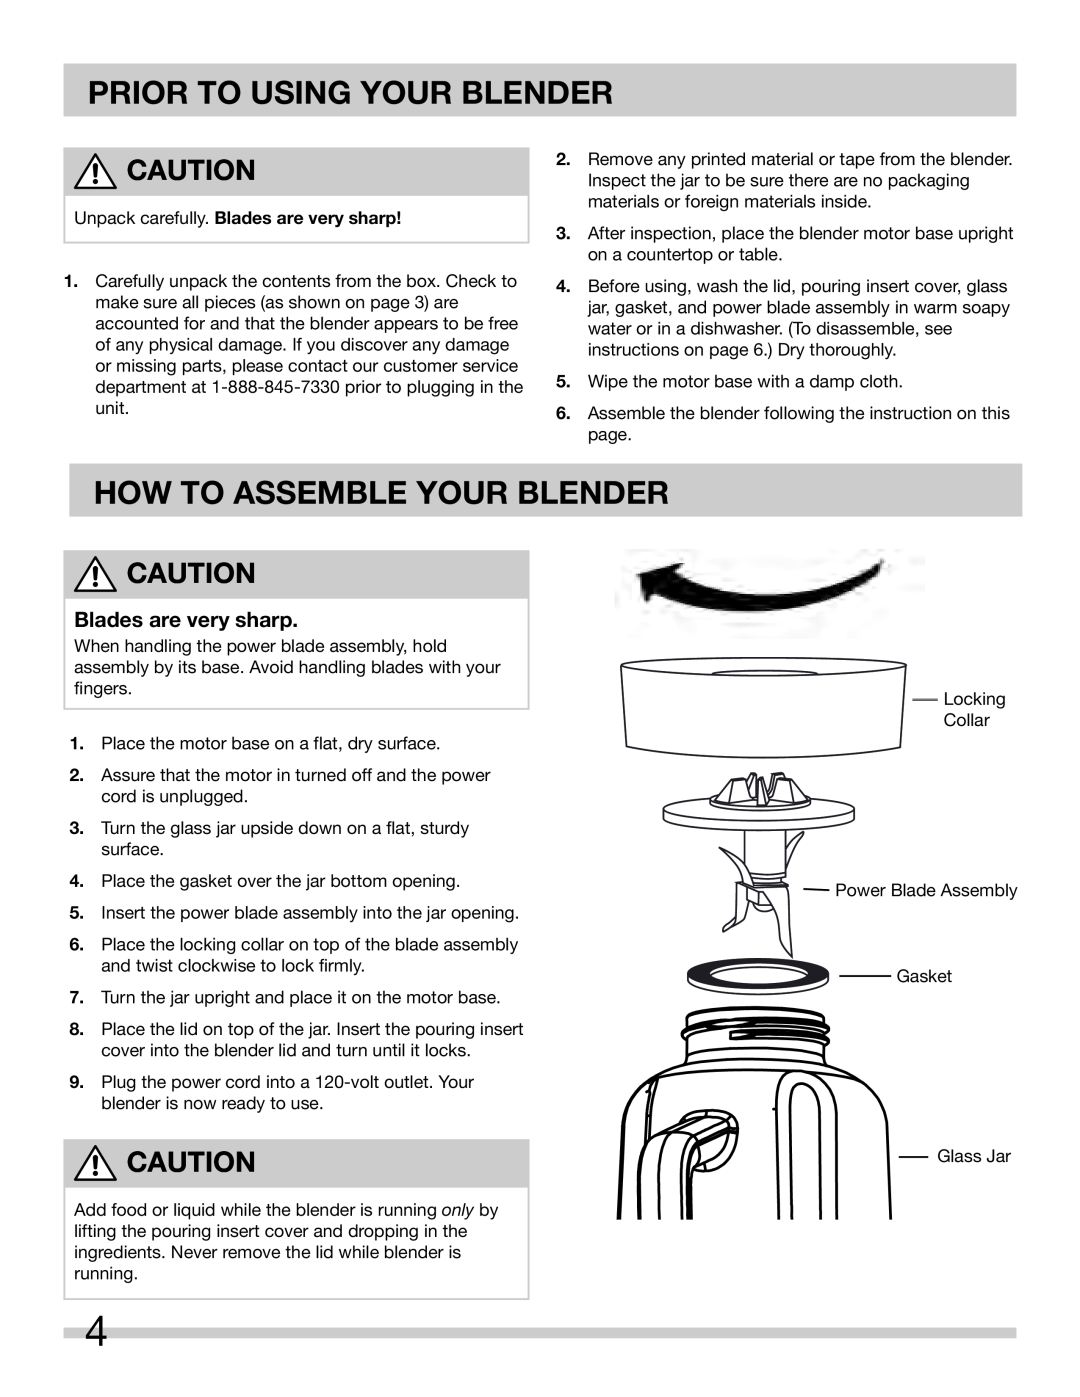 Frigidaire 900253211-UM warranty Prior To Using Your Blender, How To Assemble Your Blender, Blades are very sharp 